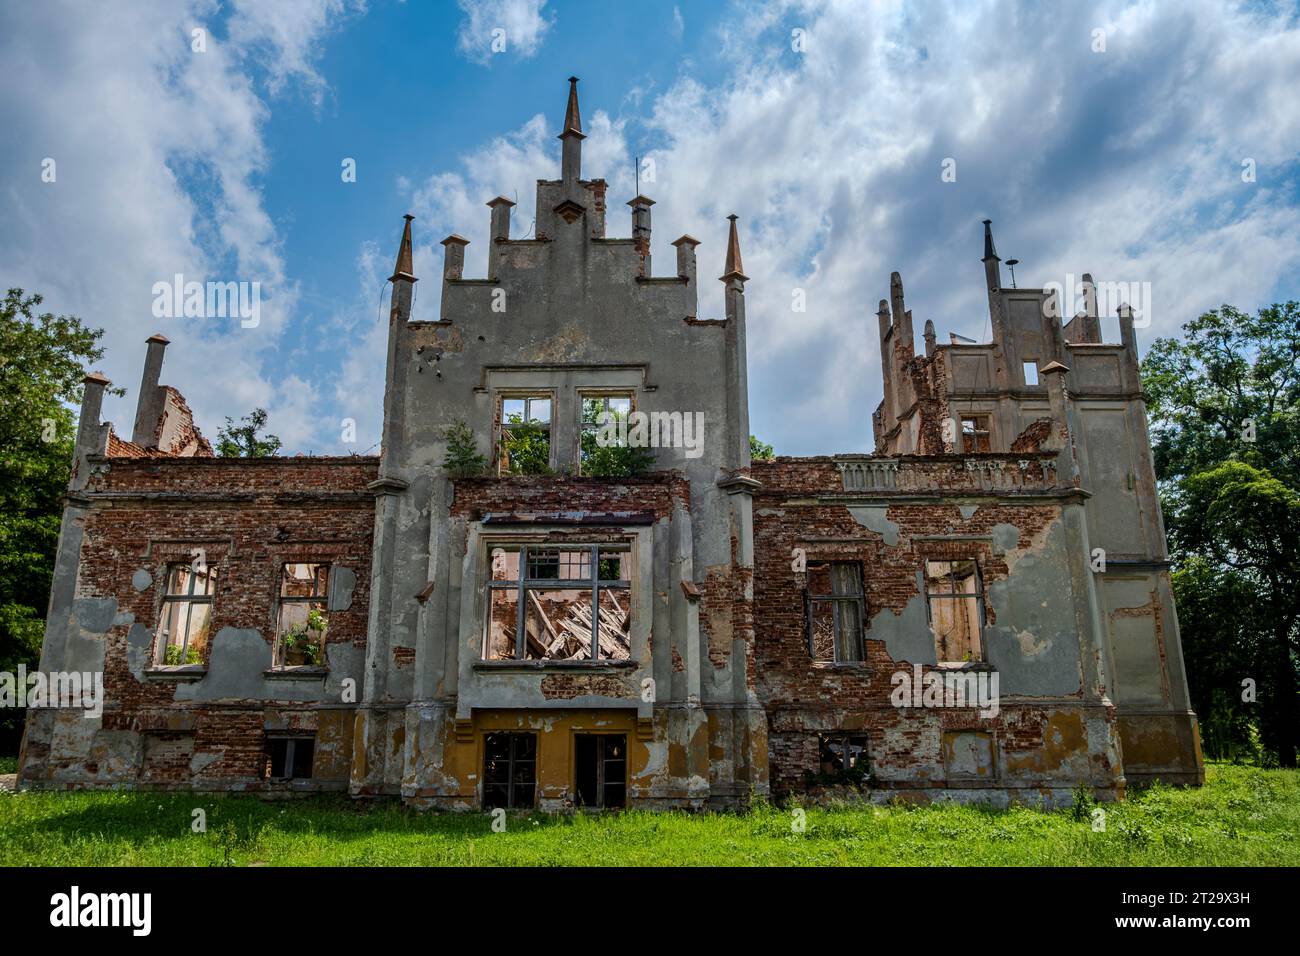 The ruin of Rosen Manor, a neo-Gothic edifice from the second half of the 19th century, in Roznow (Rosen), Opole voivodeship, Poland. Stock Photo